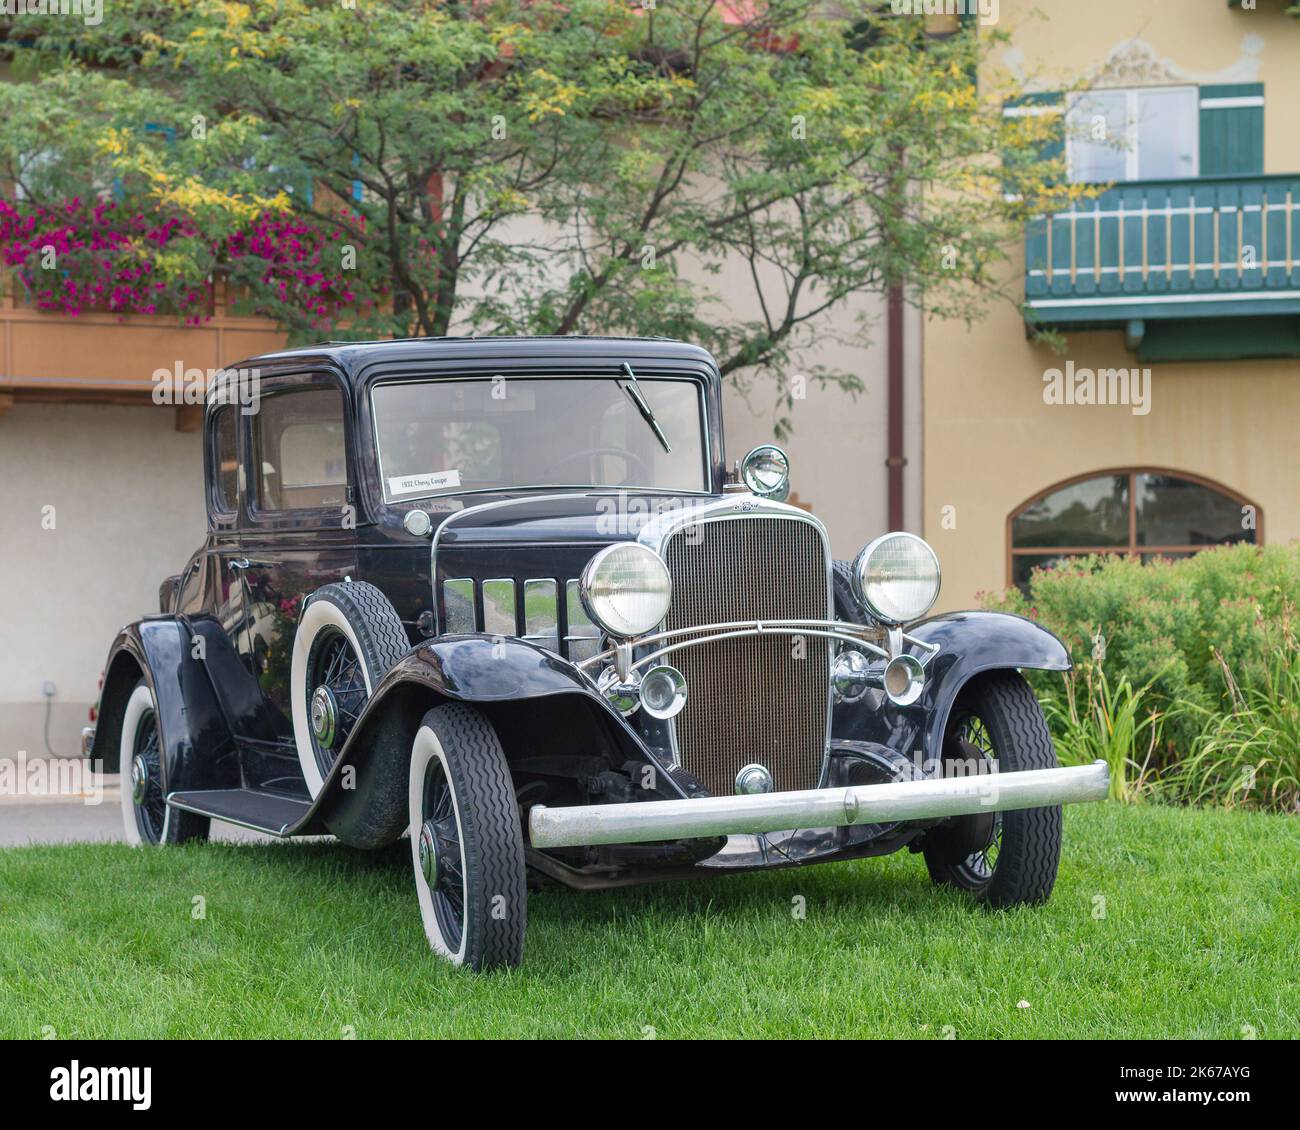 FRANKENMUTH, MI/USA - SEPTEMBER 6, 2014: A 1932 Chevrolet Coupe car, Frankenmuth Auto Fest, Heritage Park. Stock Photo